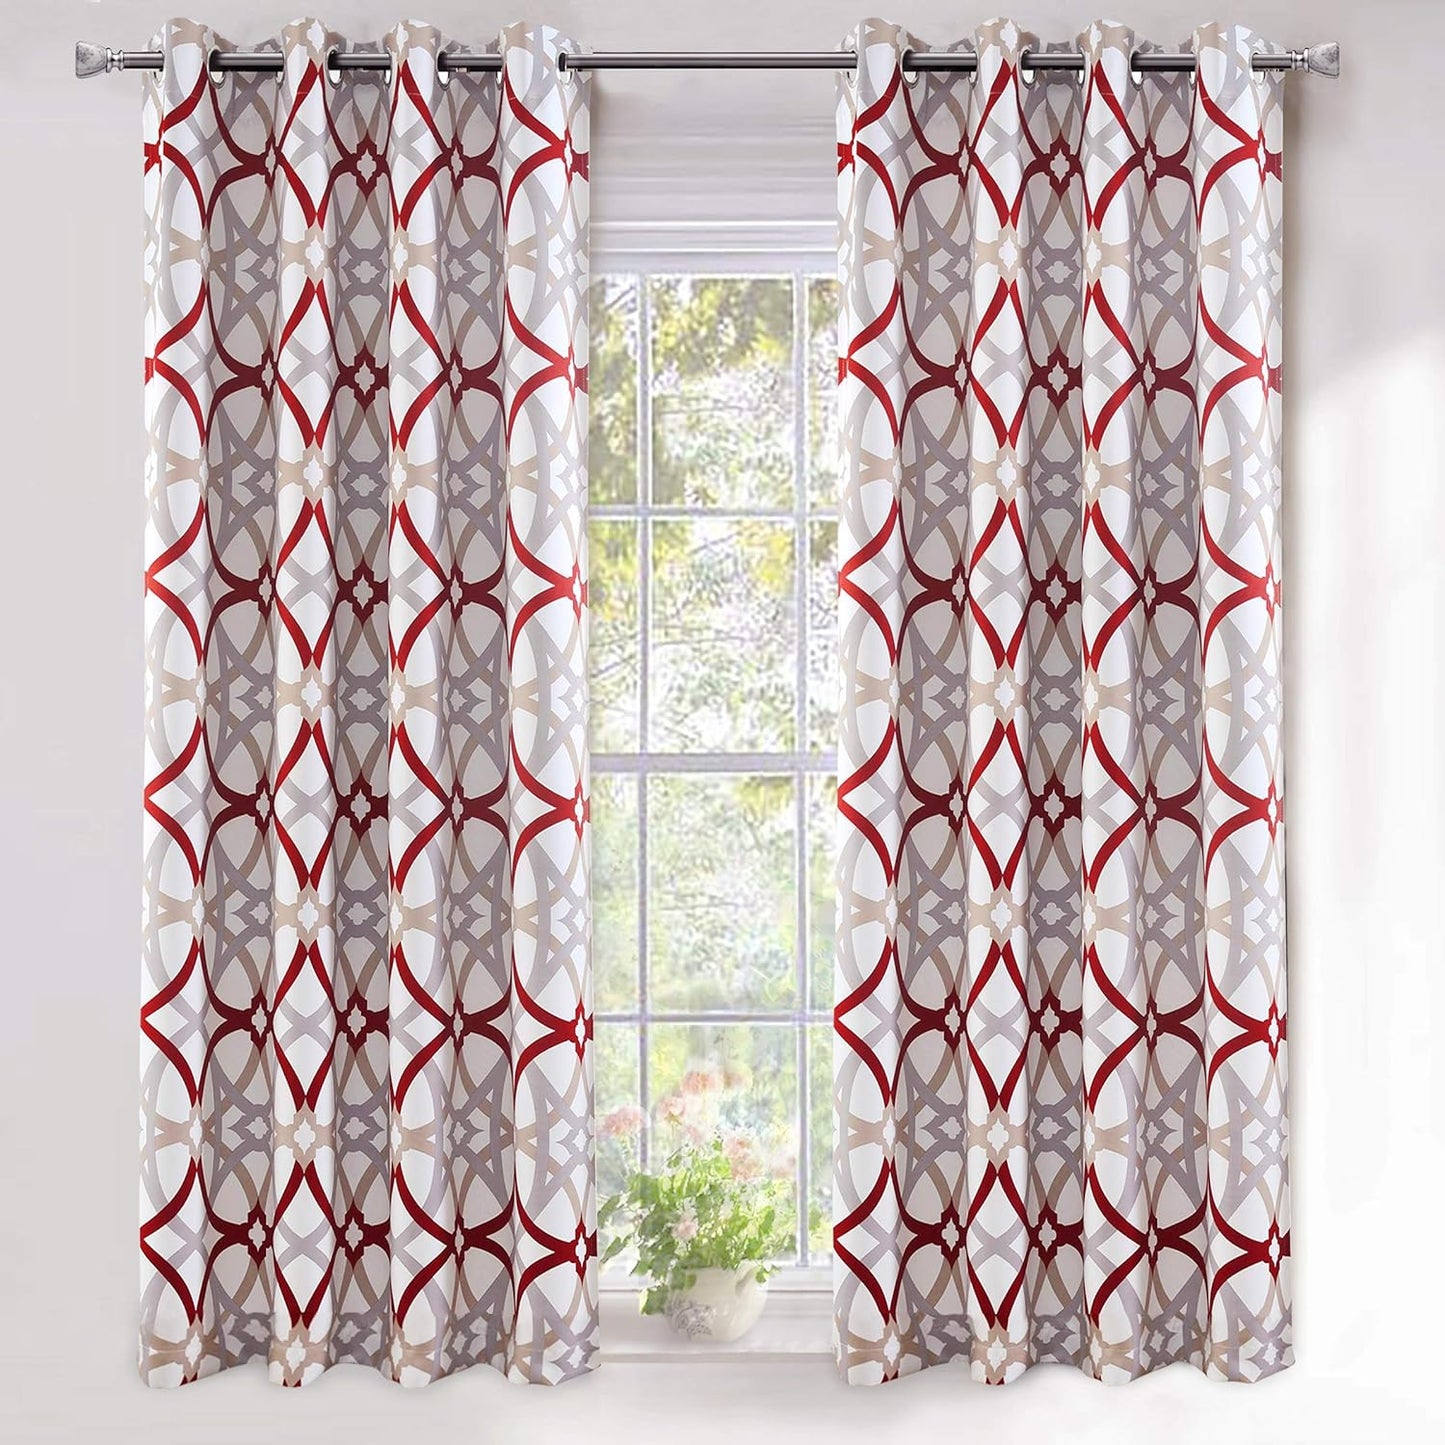 Driftaway Alexander Thermal Blackout Grommet Unlined Window Curtains Spiral Geo Trellis Pattern Set of 2 Panels Each Size 52 Inch by 84 Inch Red and Gray  DriftAway Red/Gray 52"X63" 